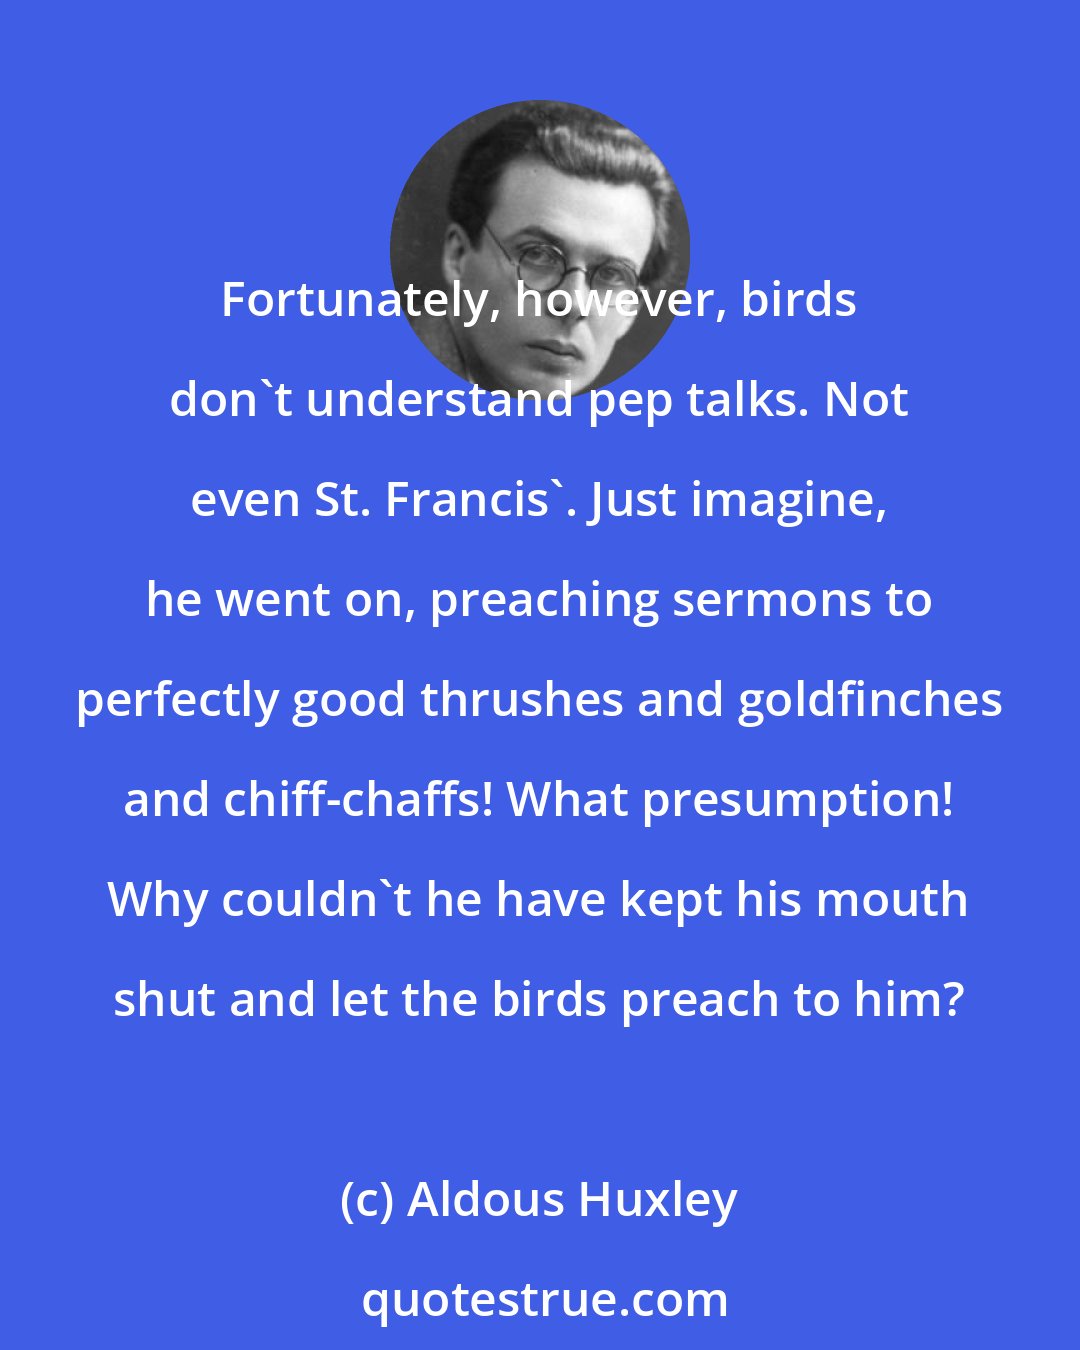 Aldous Huxley: Fortunately, however, birds don't understand pep talks. Not even St. Francis'. Just imagine, he went on, preaching sermons to perfectly good thrushes and goldfinches and chiff-chaffs! What presumption! Why couldn't he have kept his mouth shut and let the birds preach to him?